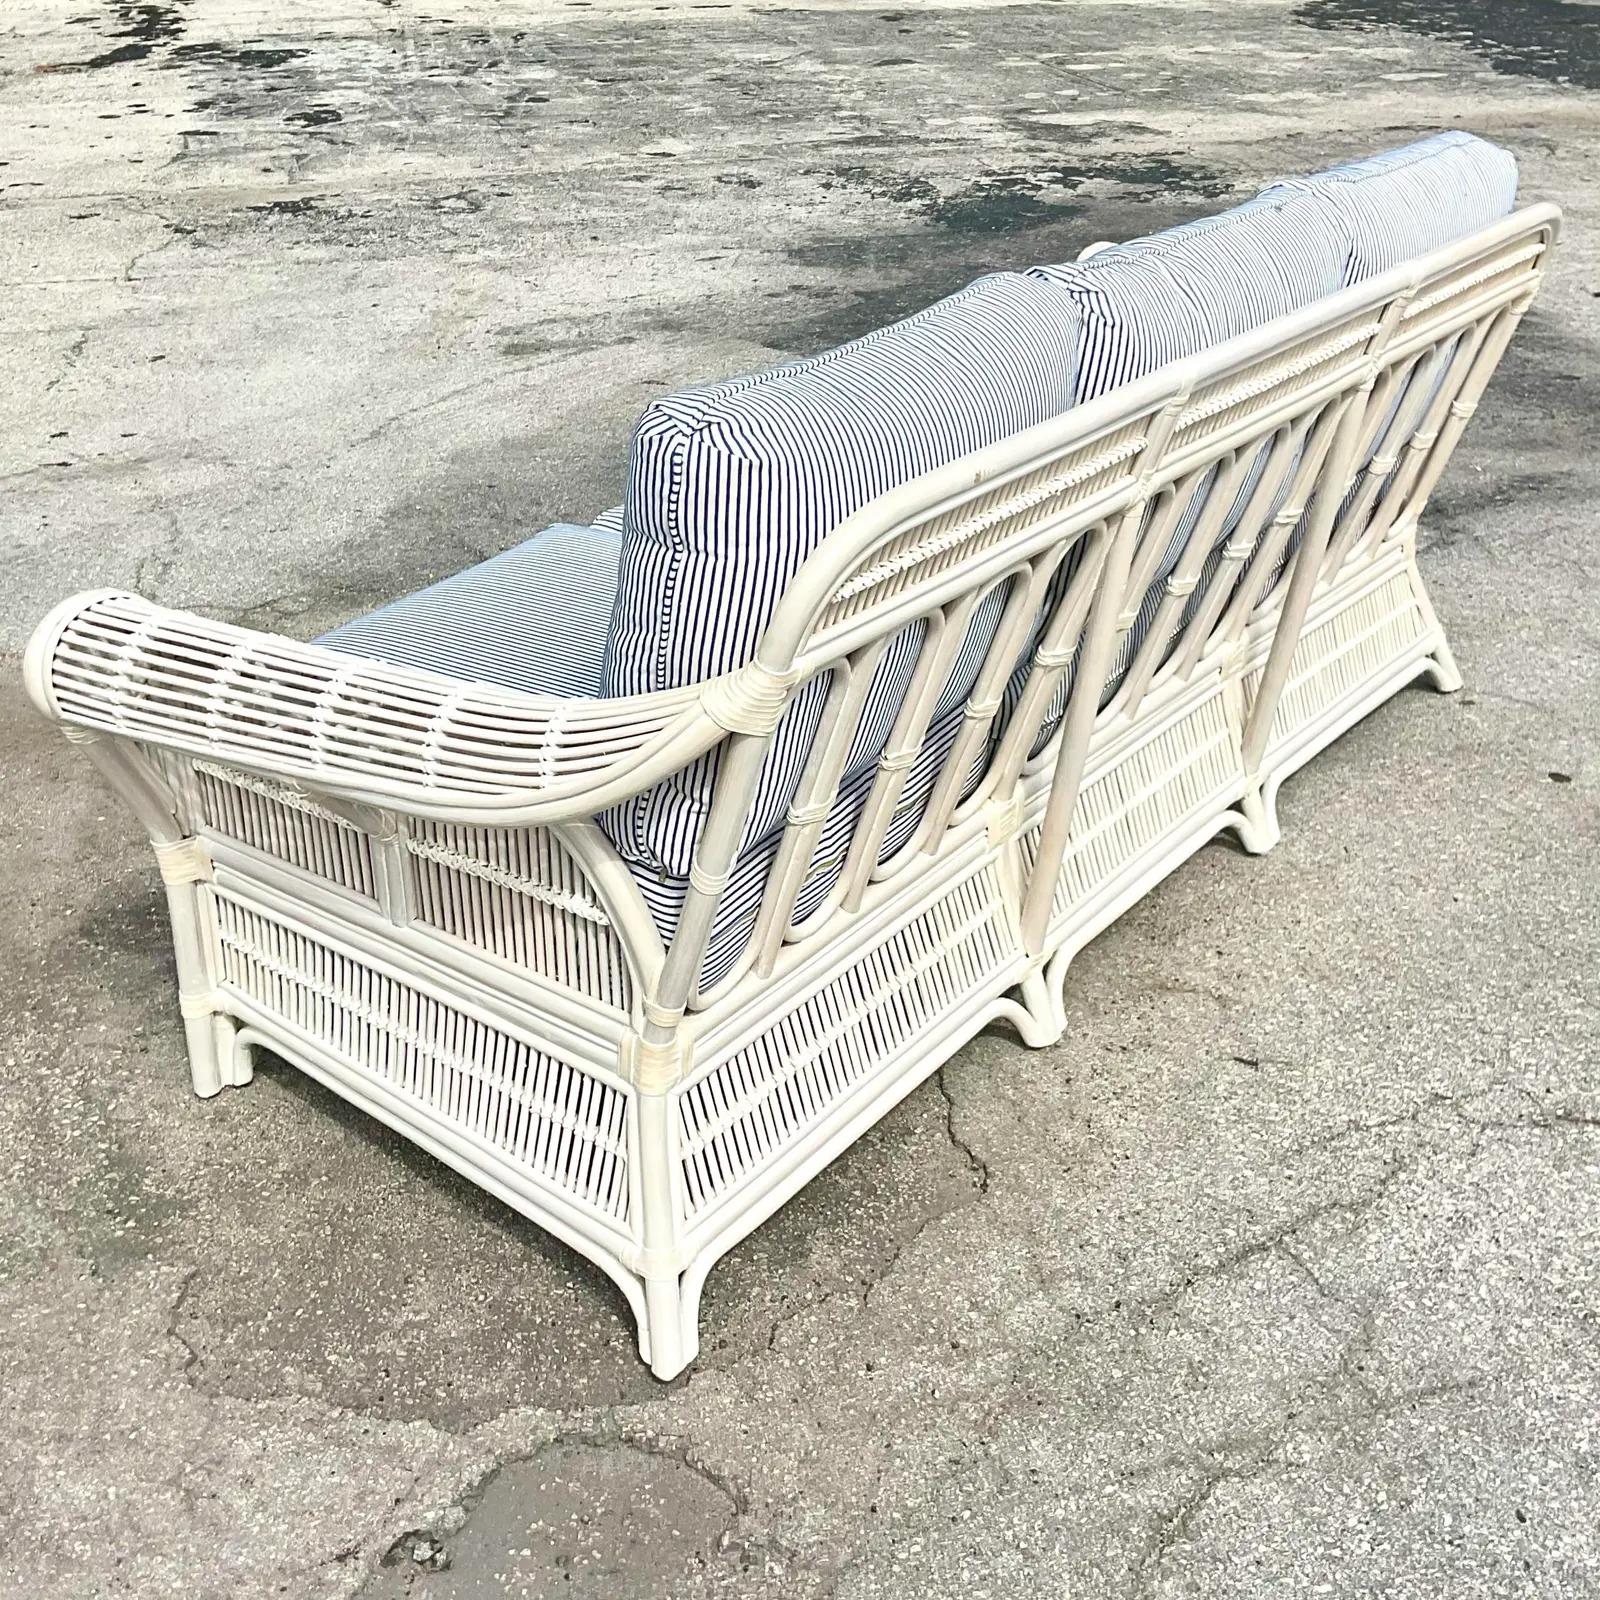 Fabulous vintage coastal sofa. A beautiful bent rattan in a white finish with chic ticking stripe upholstery. Ready to glam up your sunroom or summer house. Acquired from a Palm Beach estate.